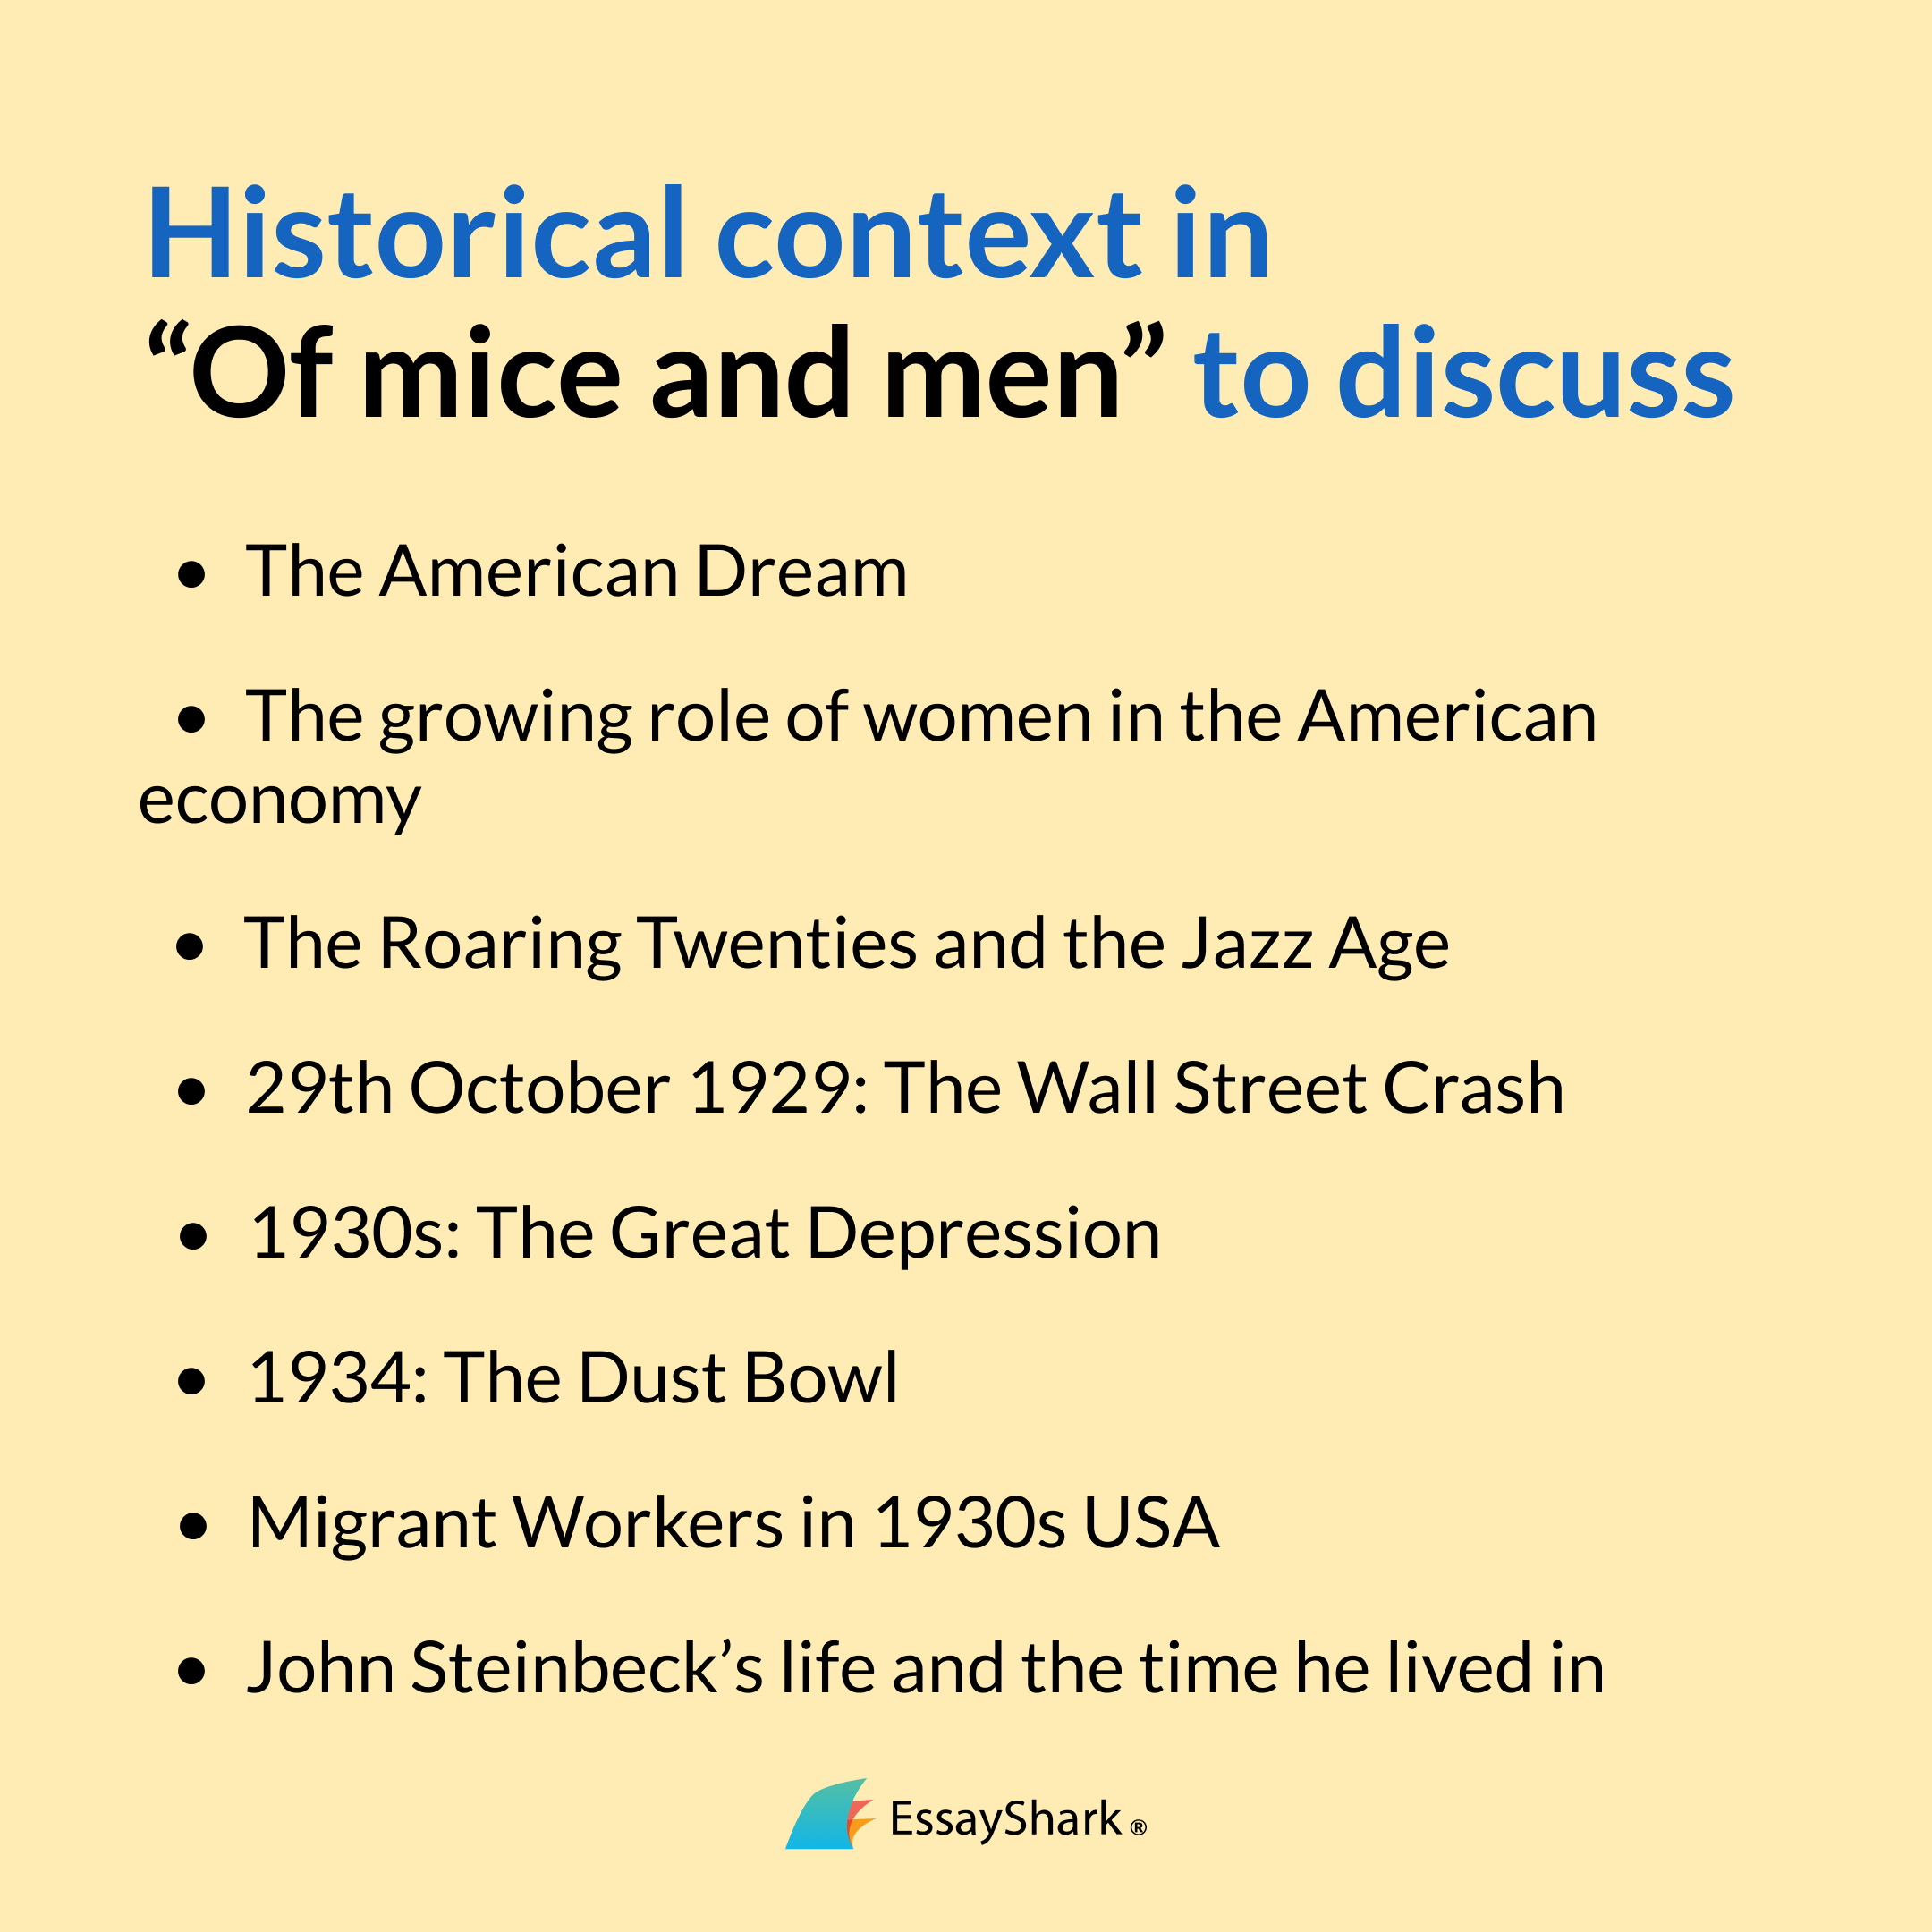 'Of Mice and Men' historical context